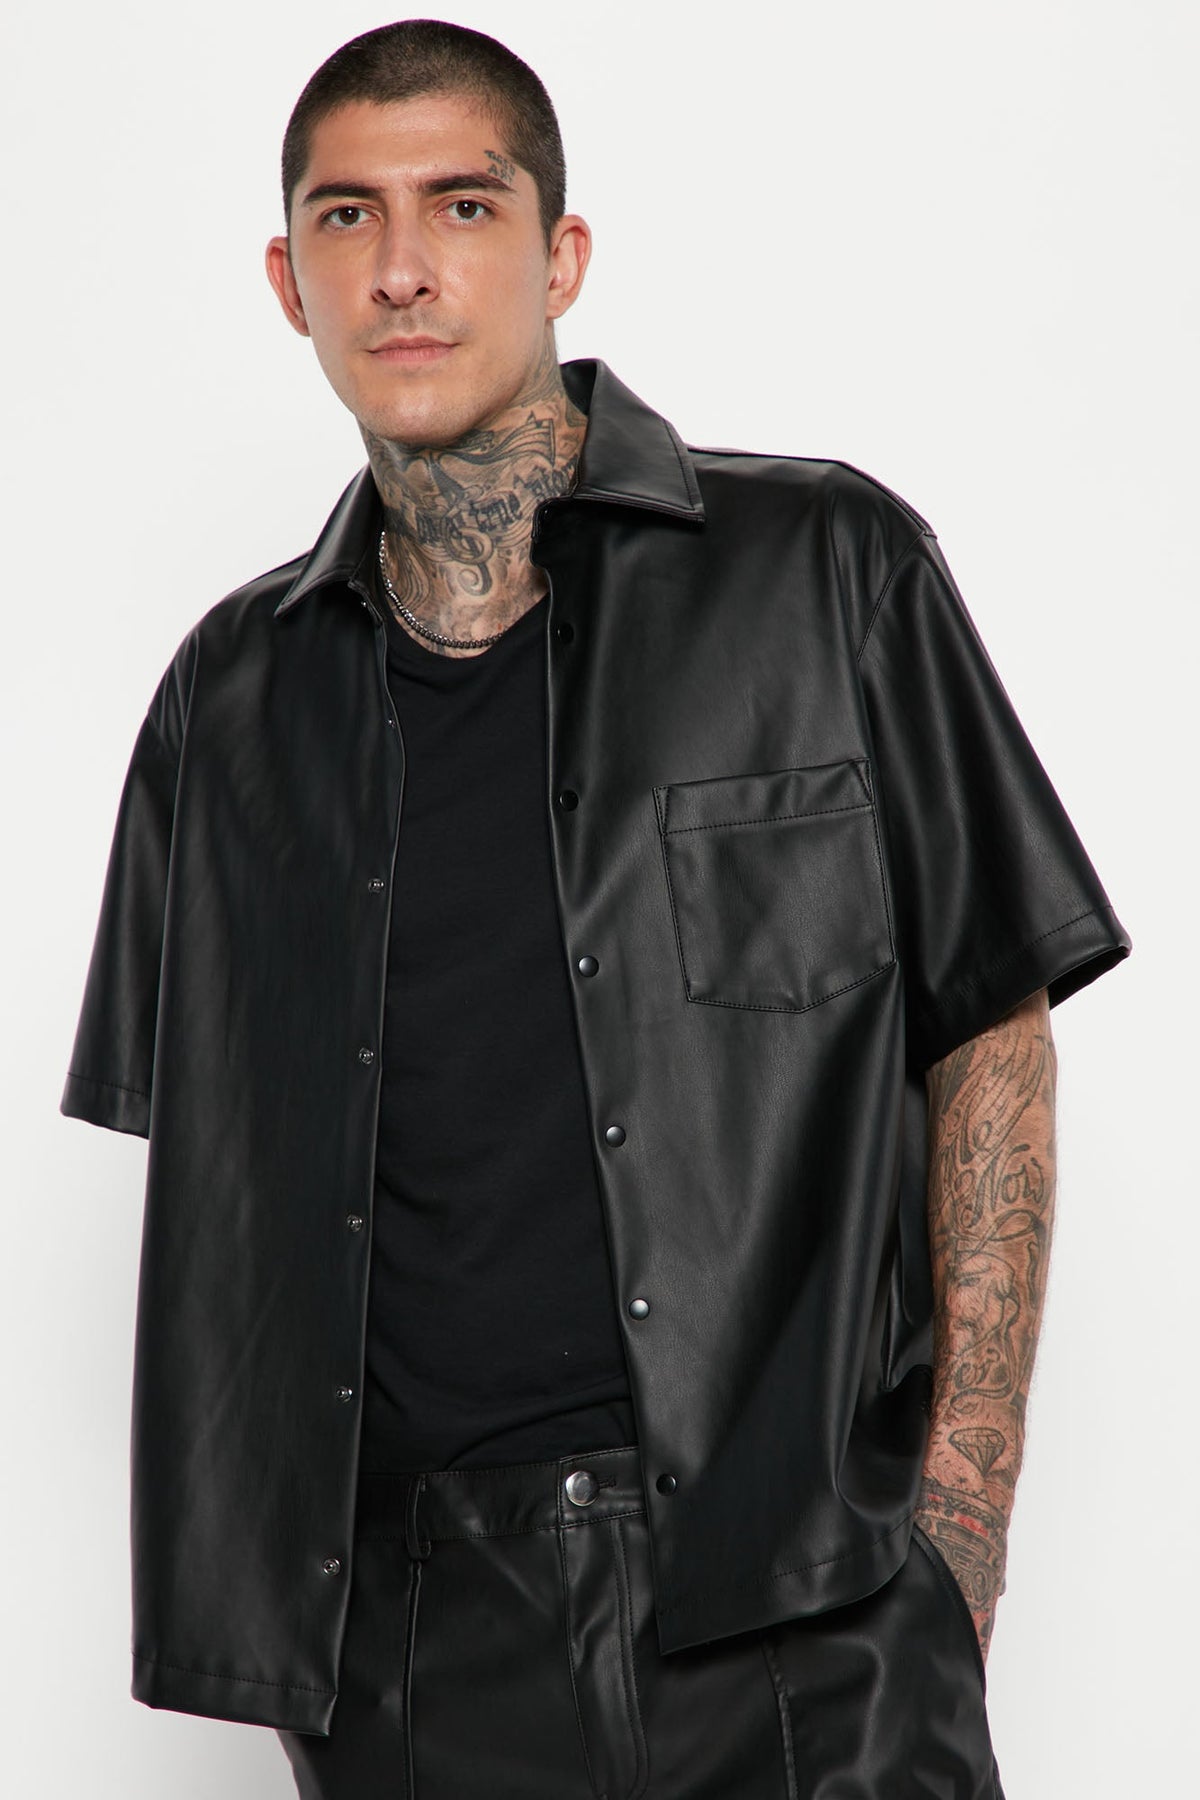 Show Stopping Faux Leather Short Sleeve Shirt - Black